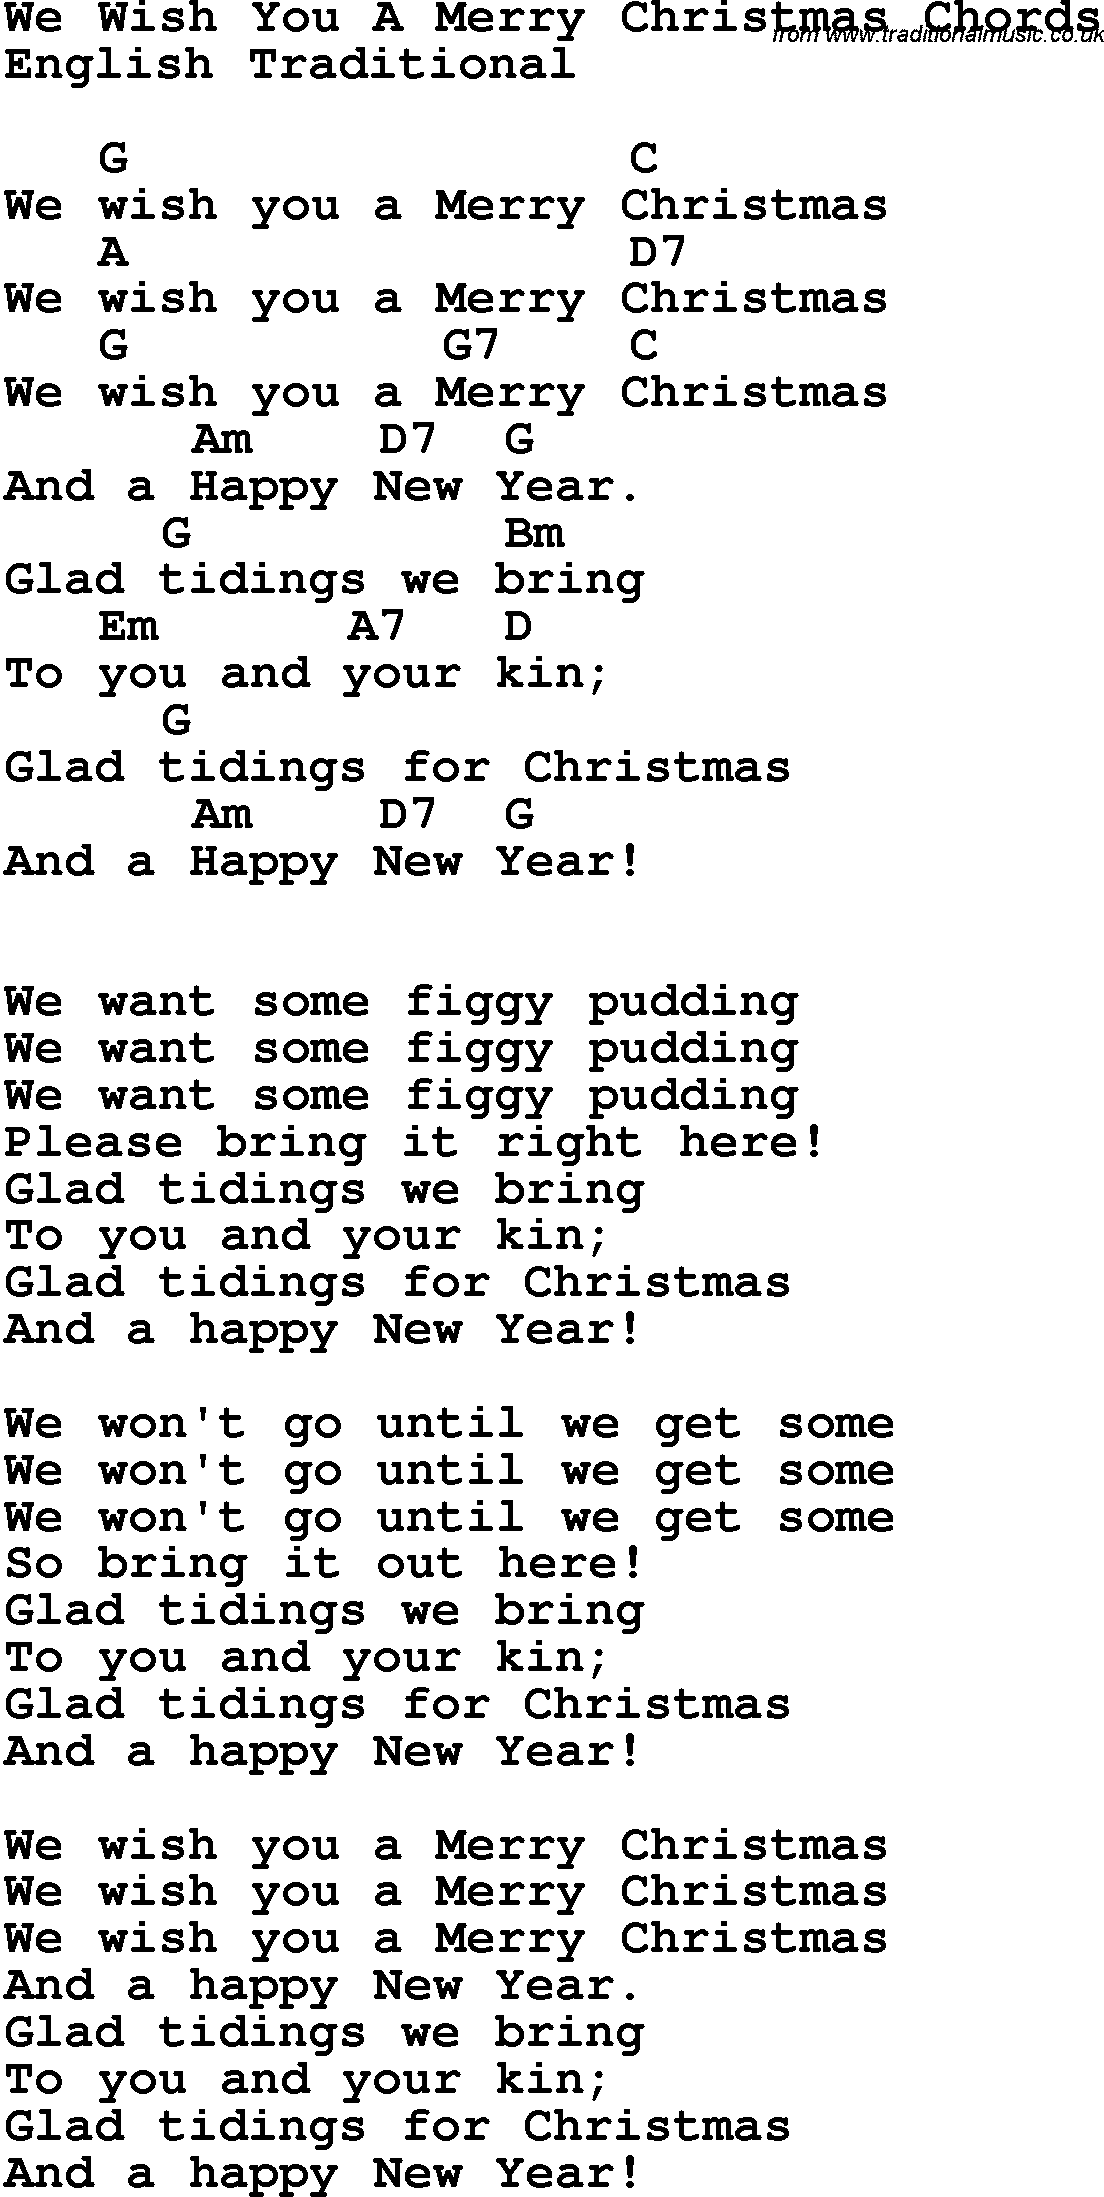 Song lyrics with guitar chords for We Wish You A Merry Christmas